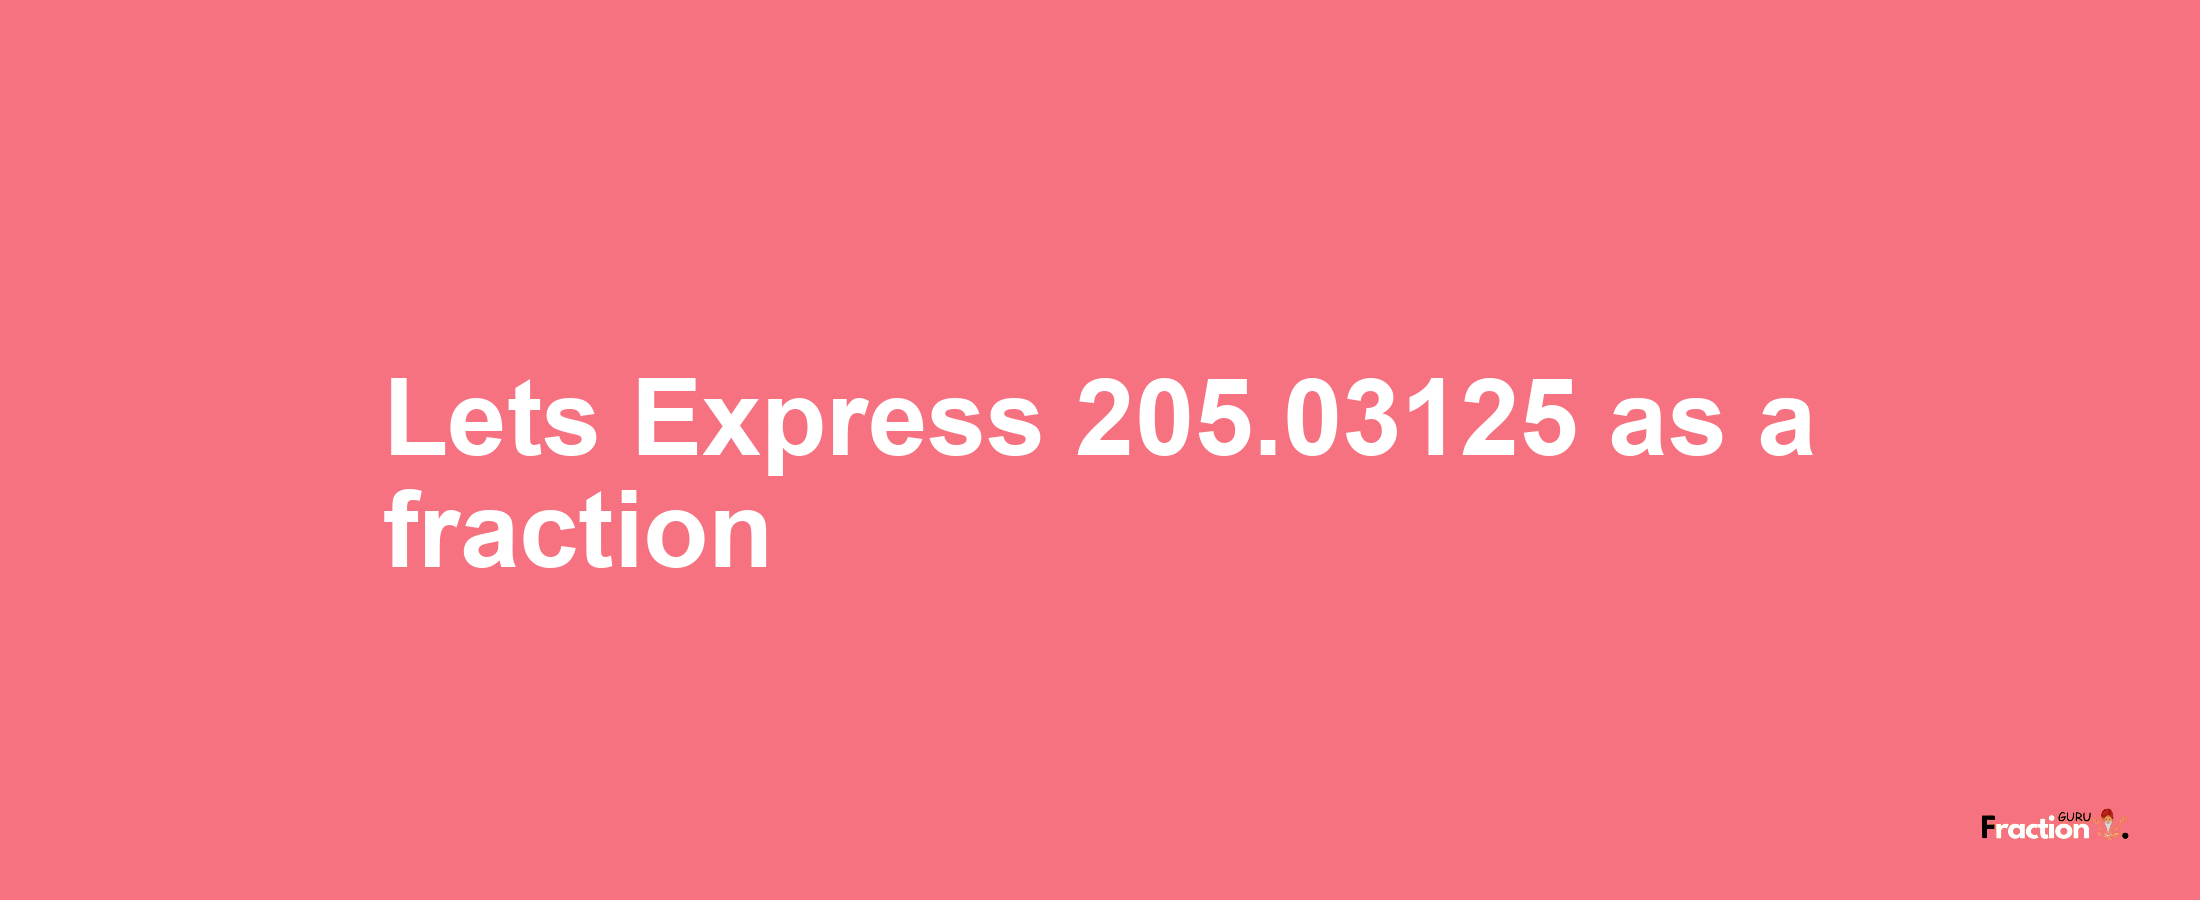 Lets Express 205.03125 as afraction